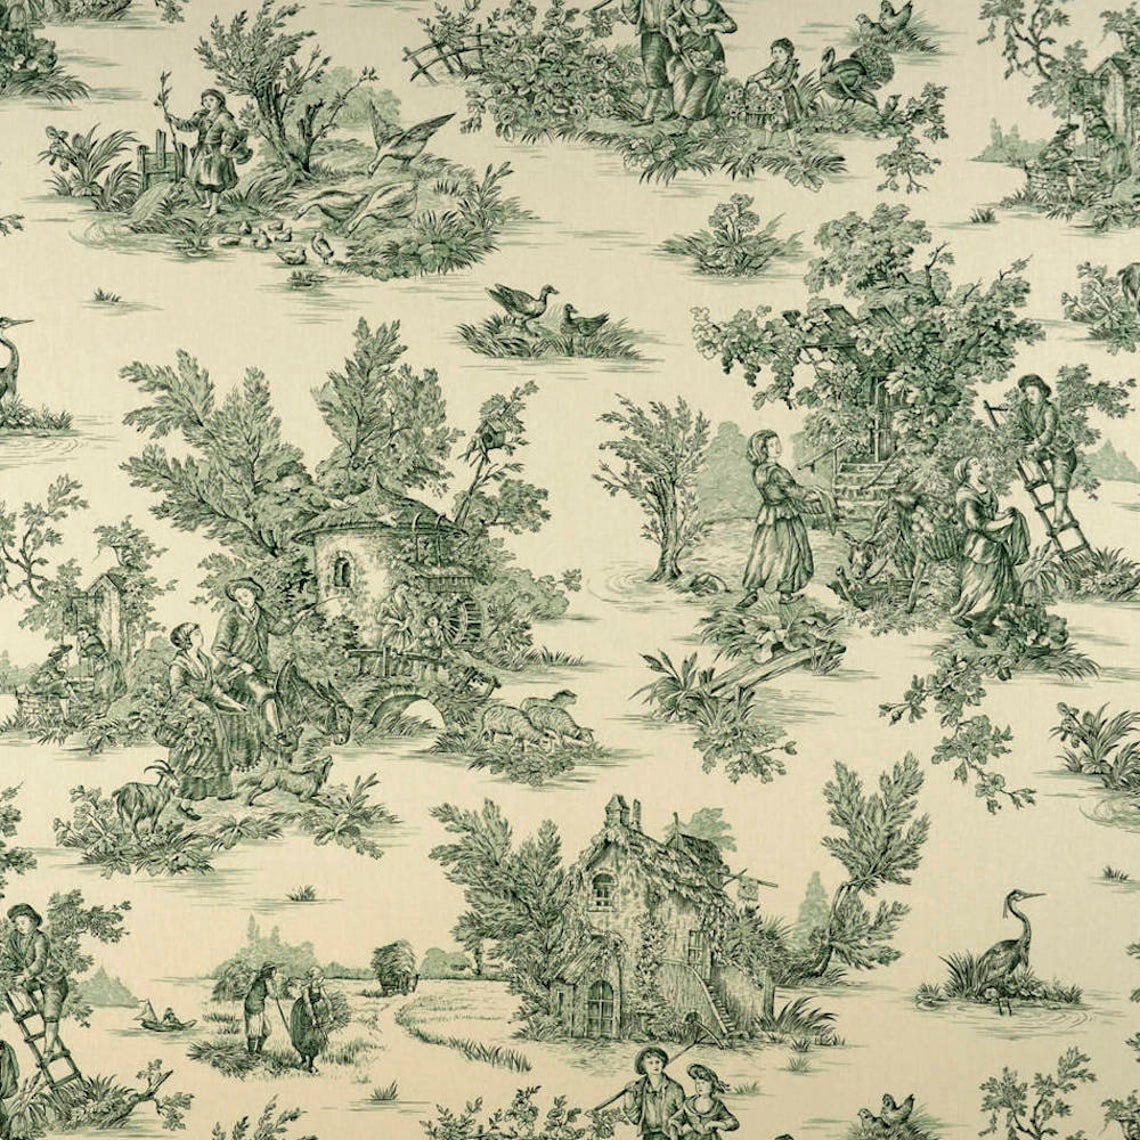 rod pocket curtain panels pair in pastorale #3 green on cream french country toile